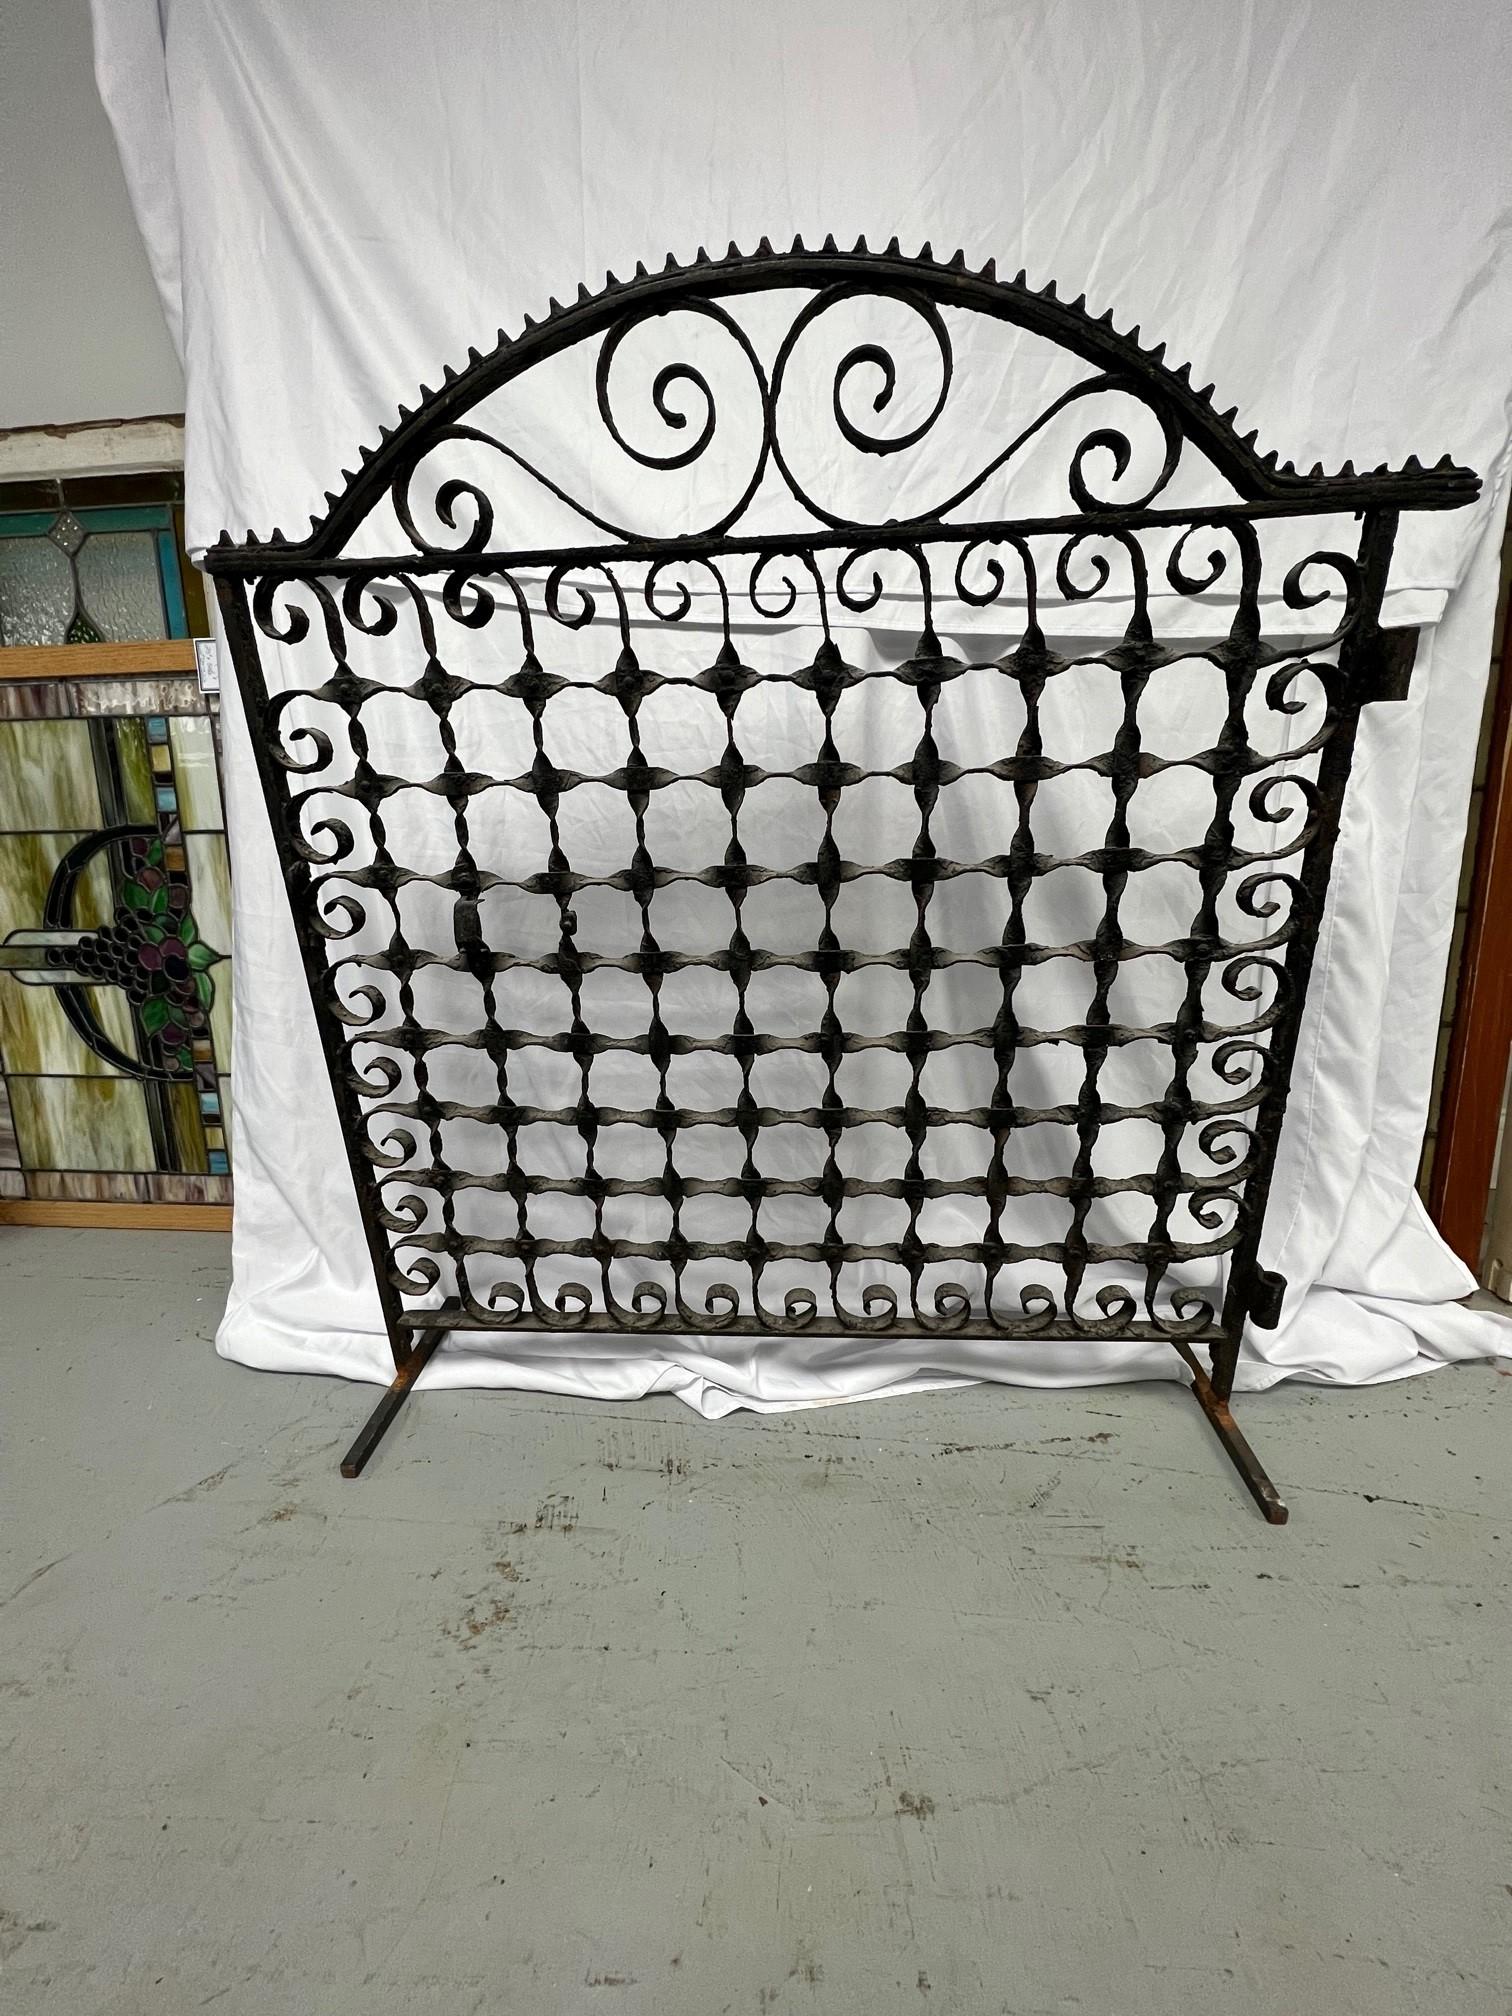 Late 19th century decorative iron arched gate salvaged from a NYC. Brownstone. This is a nice original iron gate in very good condition and a great size with a nice arch top. The gate has been modified with two iron stands or feet which allow the